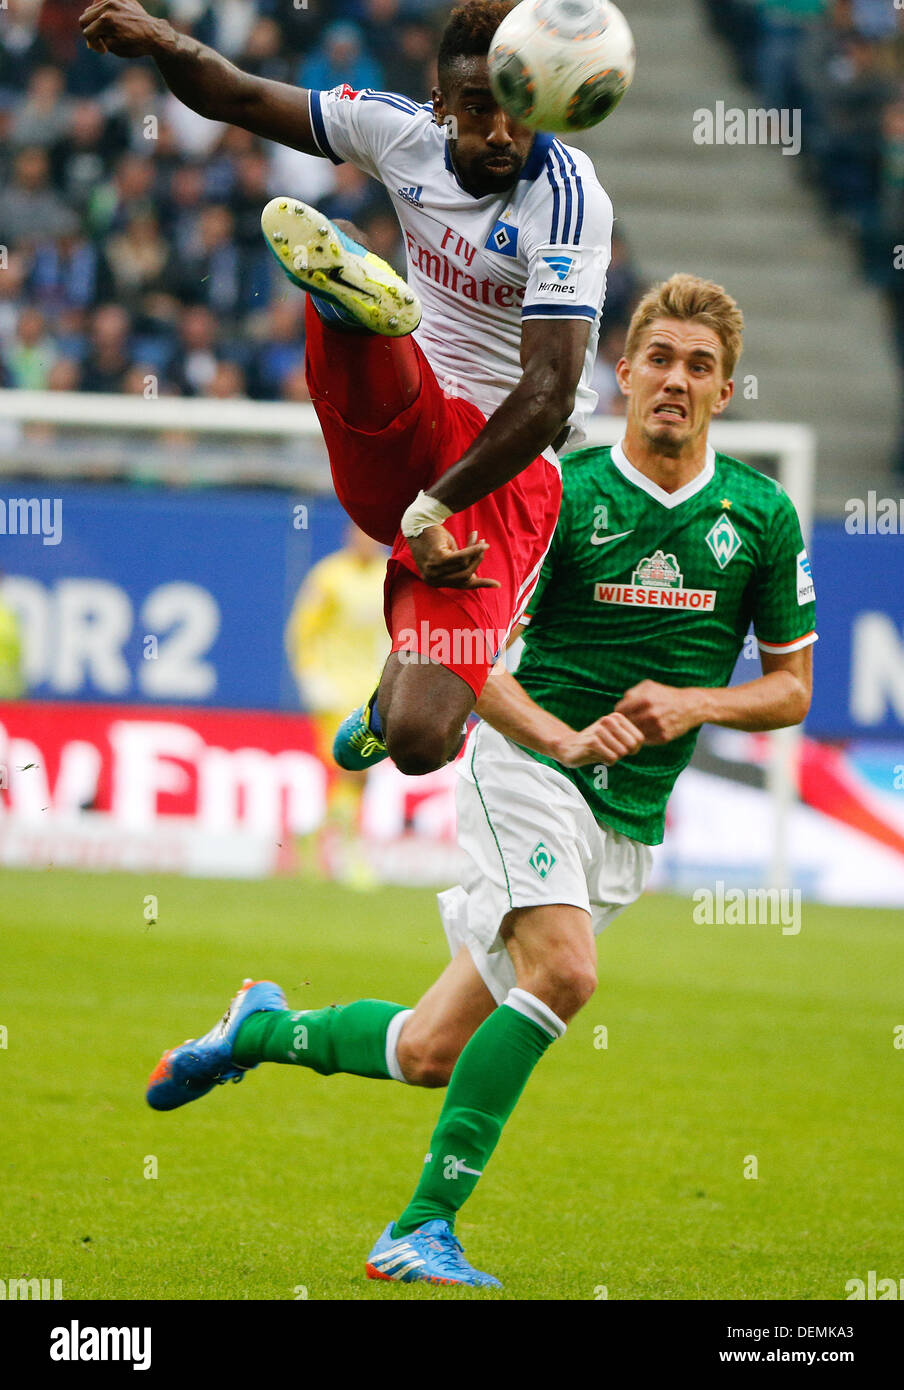 Hamburg, Germany. 21st Sep, 2013. Bremen's Nils Petersen (R) vies for the ball with Hamburg's Johan Djourou during the Bundesliga soccer match between Hamburger SV and Werder Bremen at Imtech-Arena in Hamburg, Germany, 21 September 2013. Photo: AXEL HEIMKEN (ATTENTION: Due to the accreditation guidelines, the DFL only permits the publication and utilisation of up to 15 pictures per match on the internet and in online media during the match.)/dpa/Alamy Live News Stock Photo